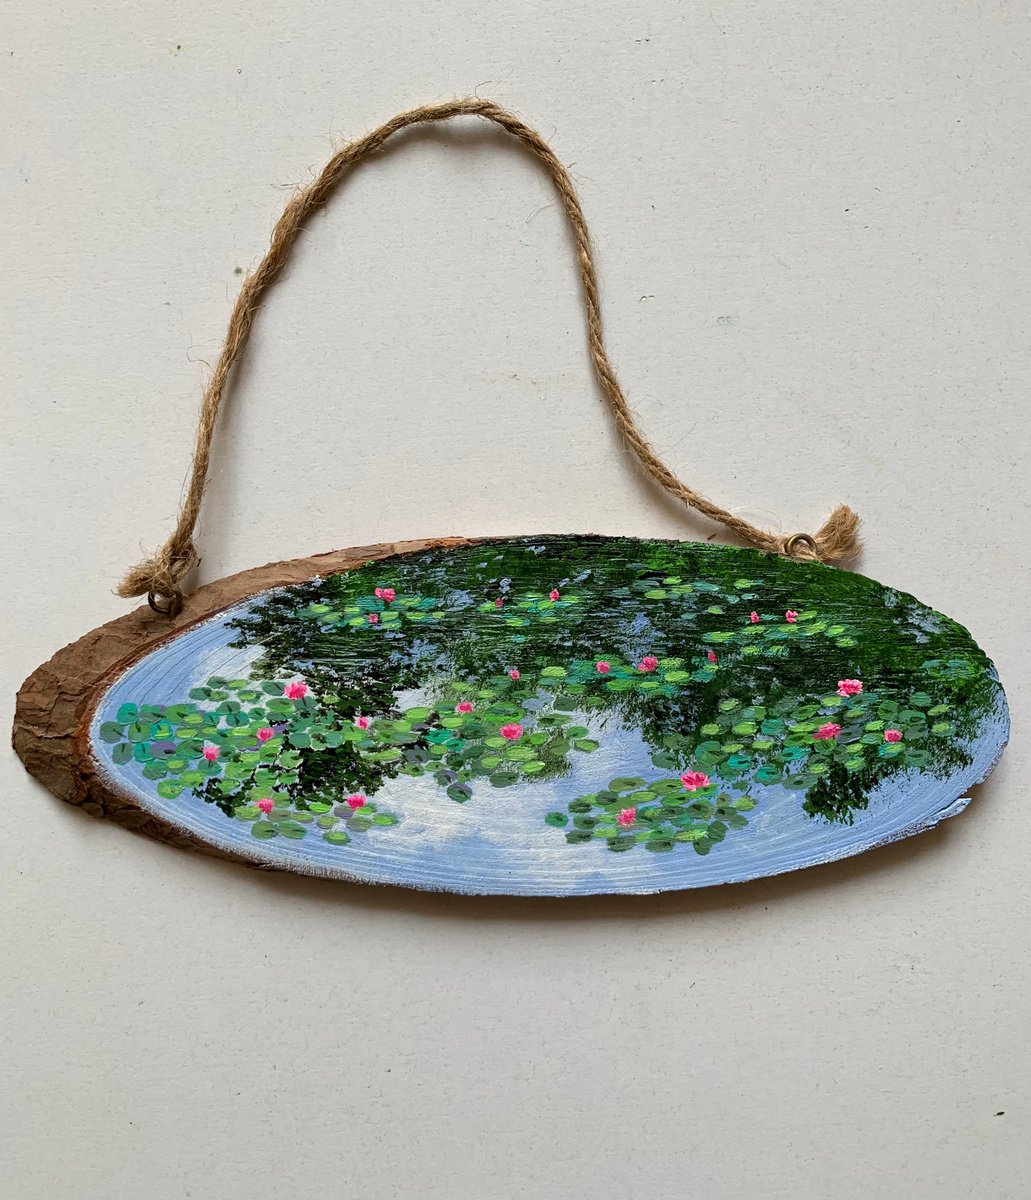 Monet’s Water lilies garden - painting on wood by Amita Dand